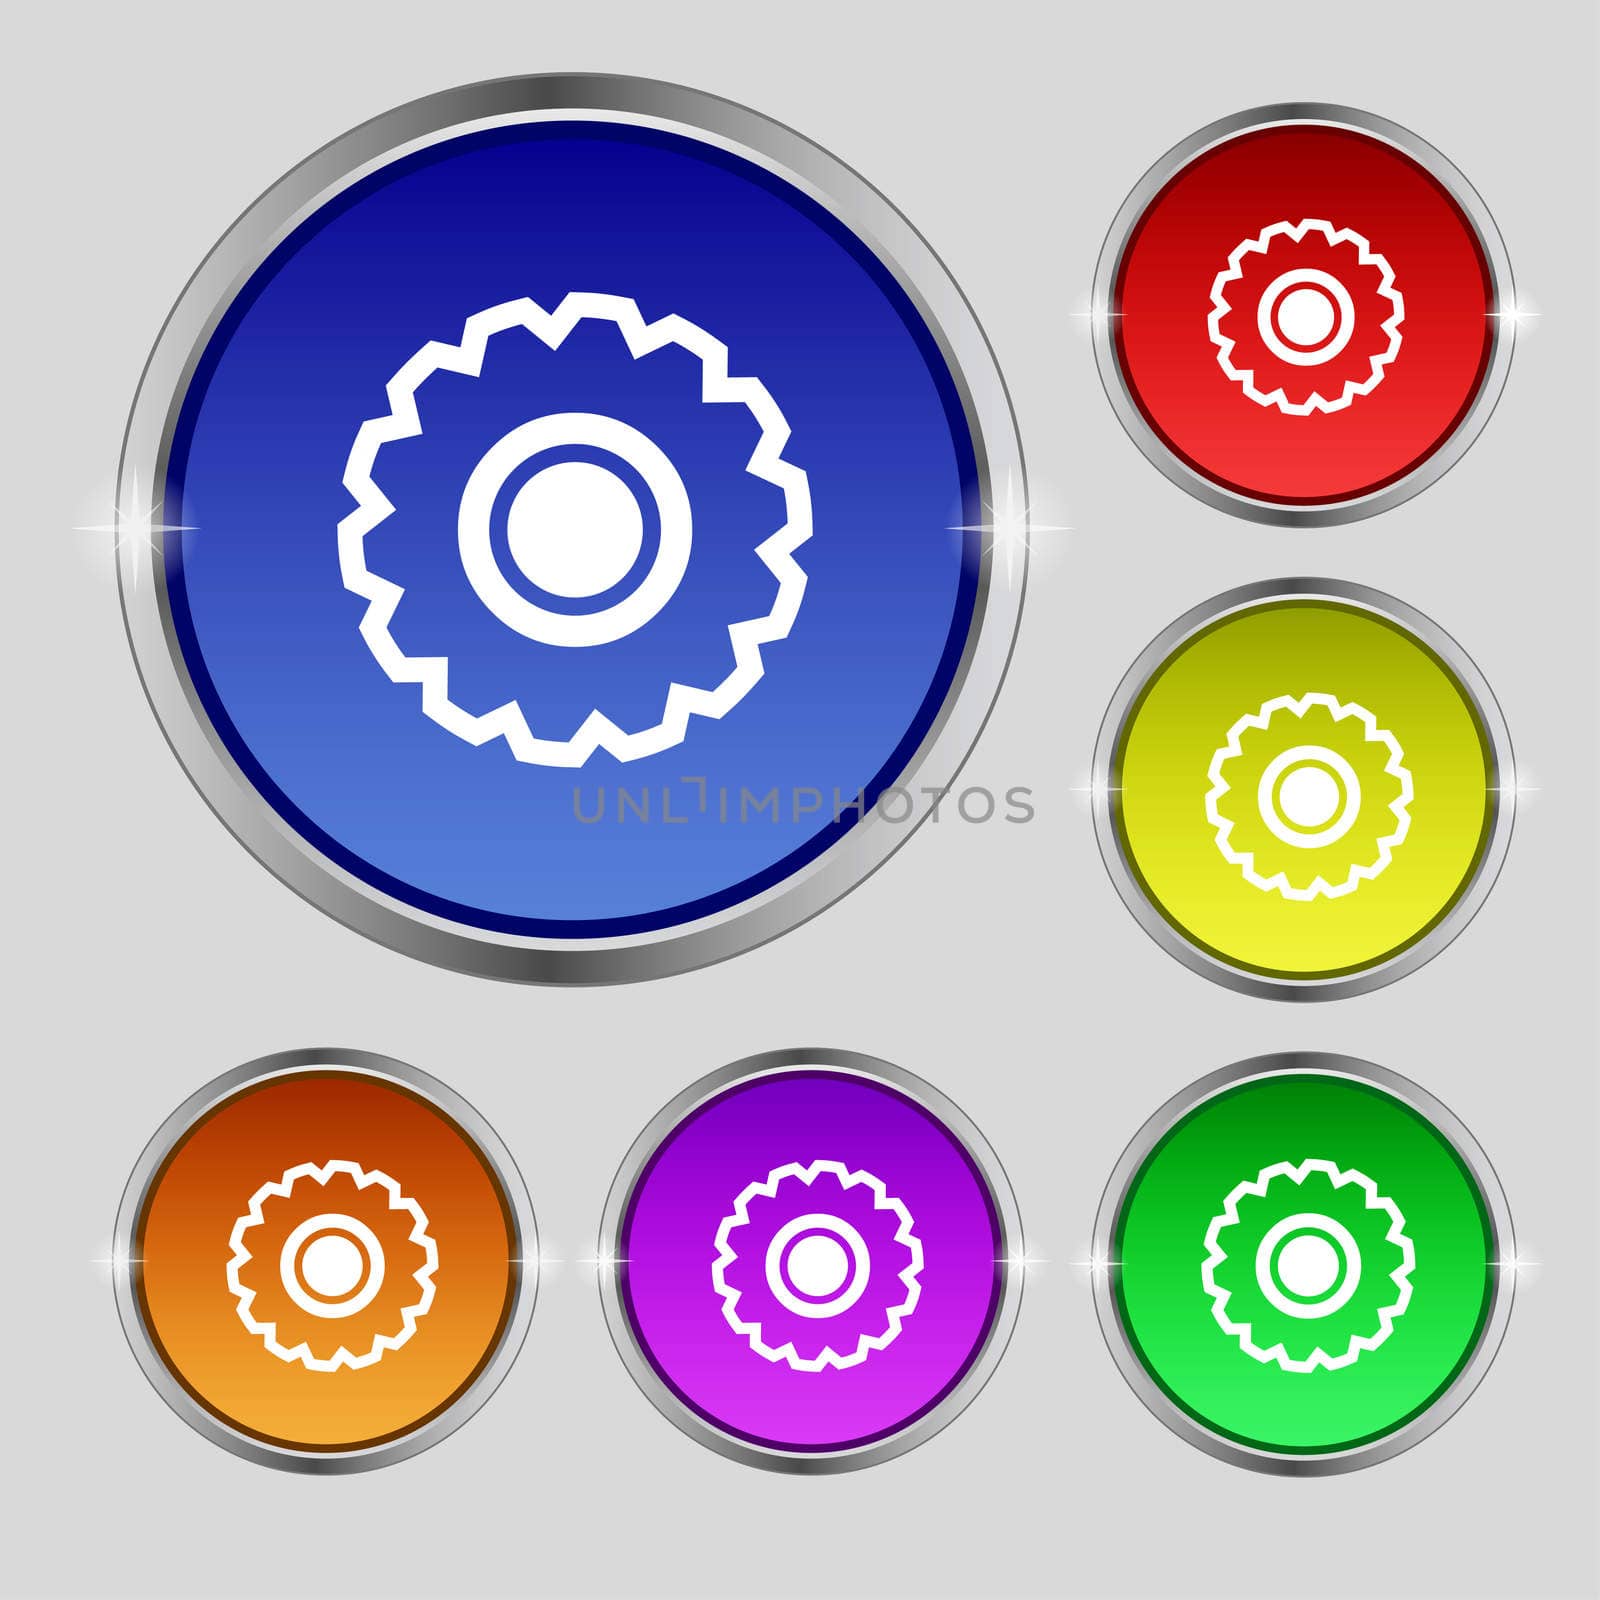  sign. Round symbol on bright colourful buttons. illustration